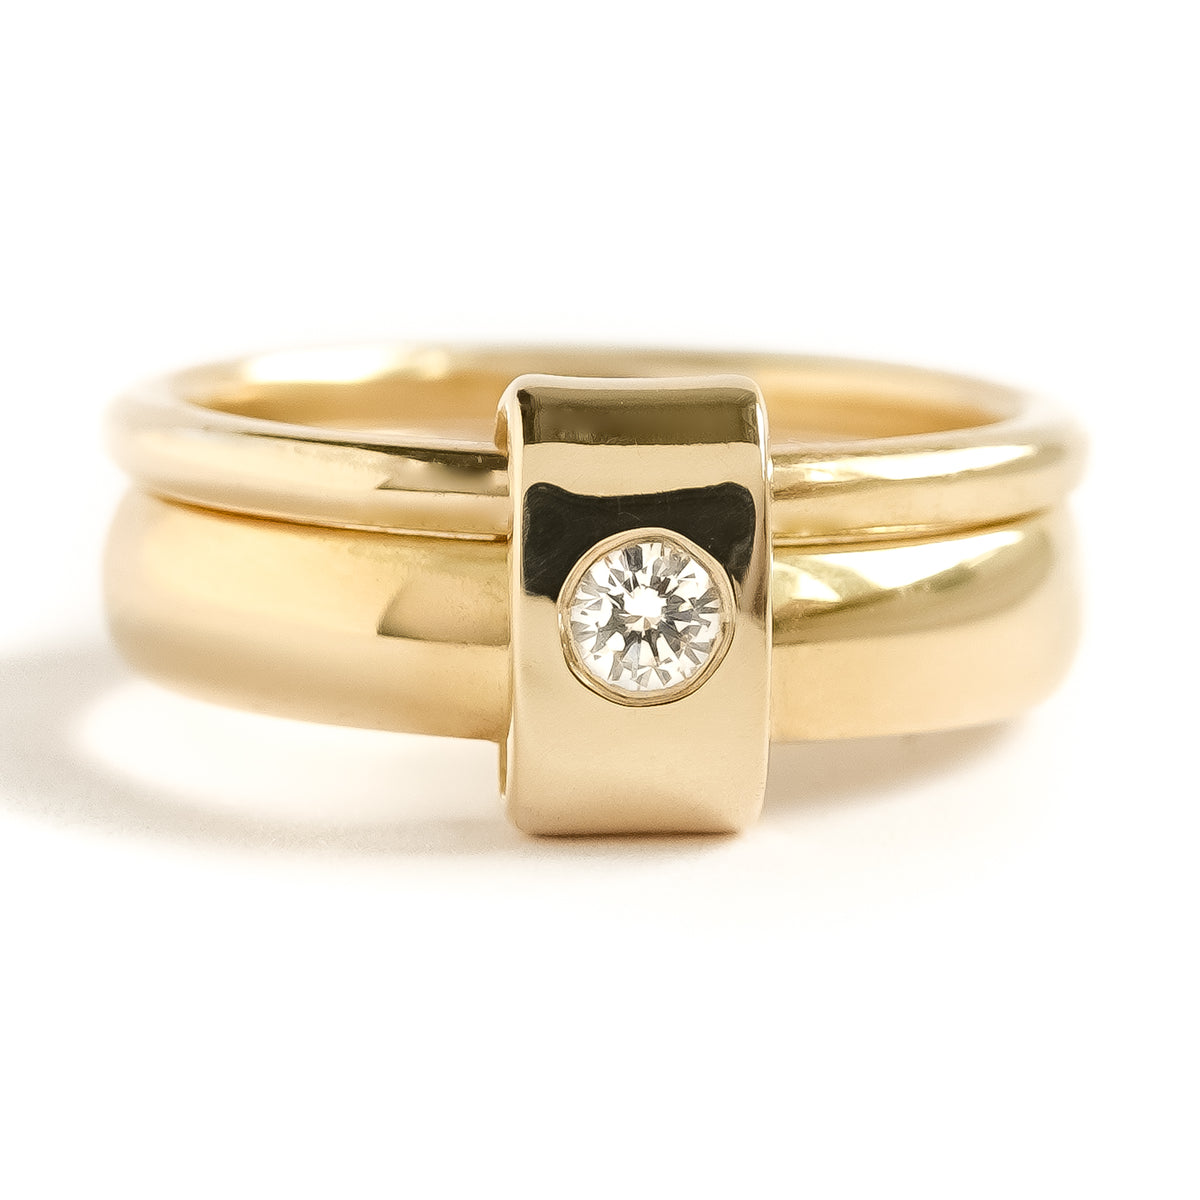 Contemporary double band looped 18ct gold diamond wedding or engagement ring